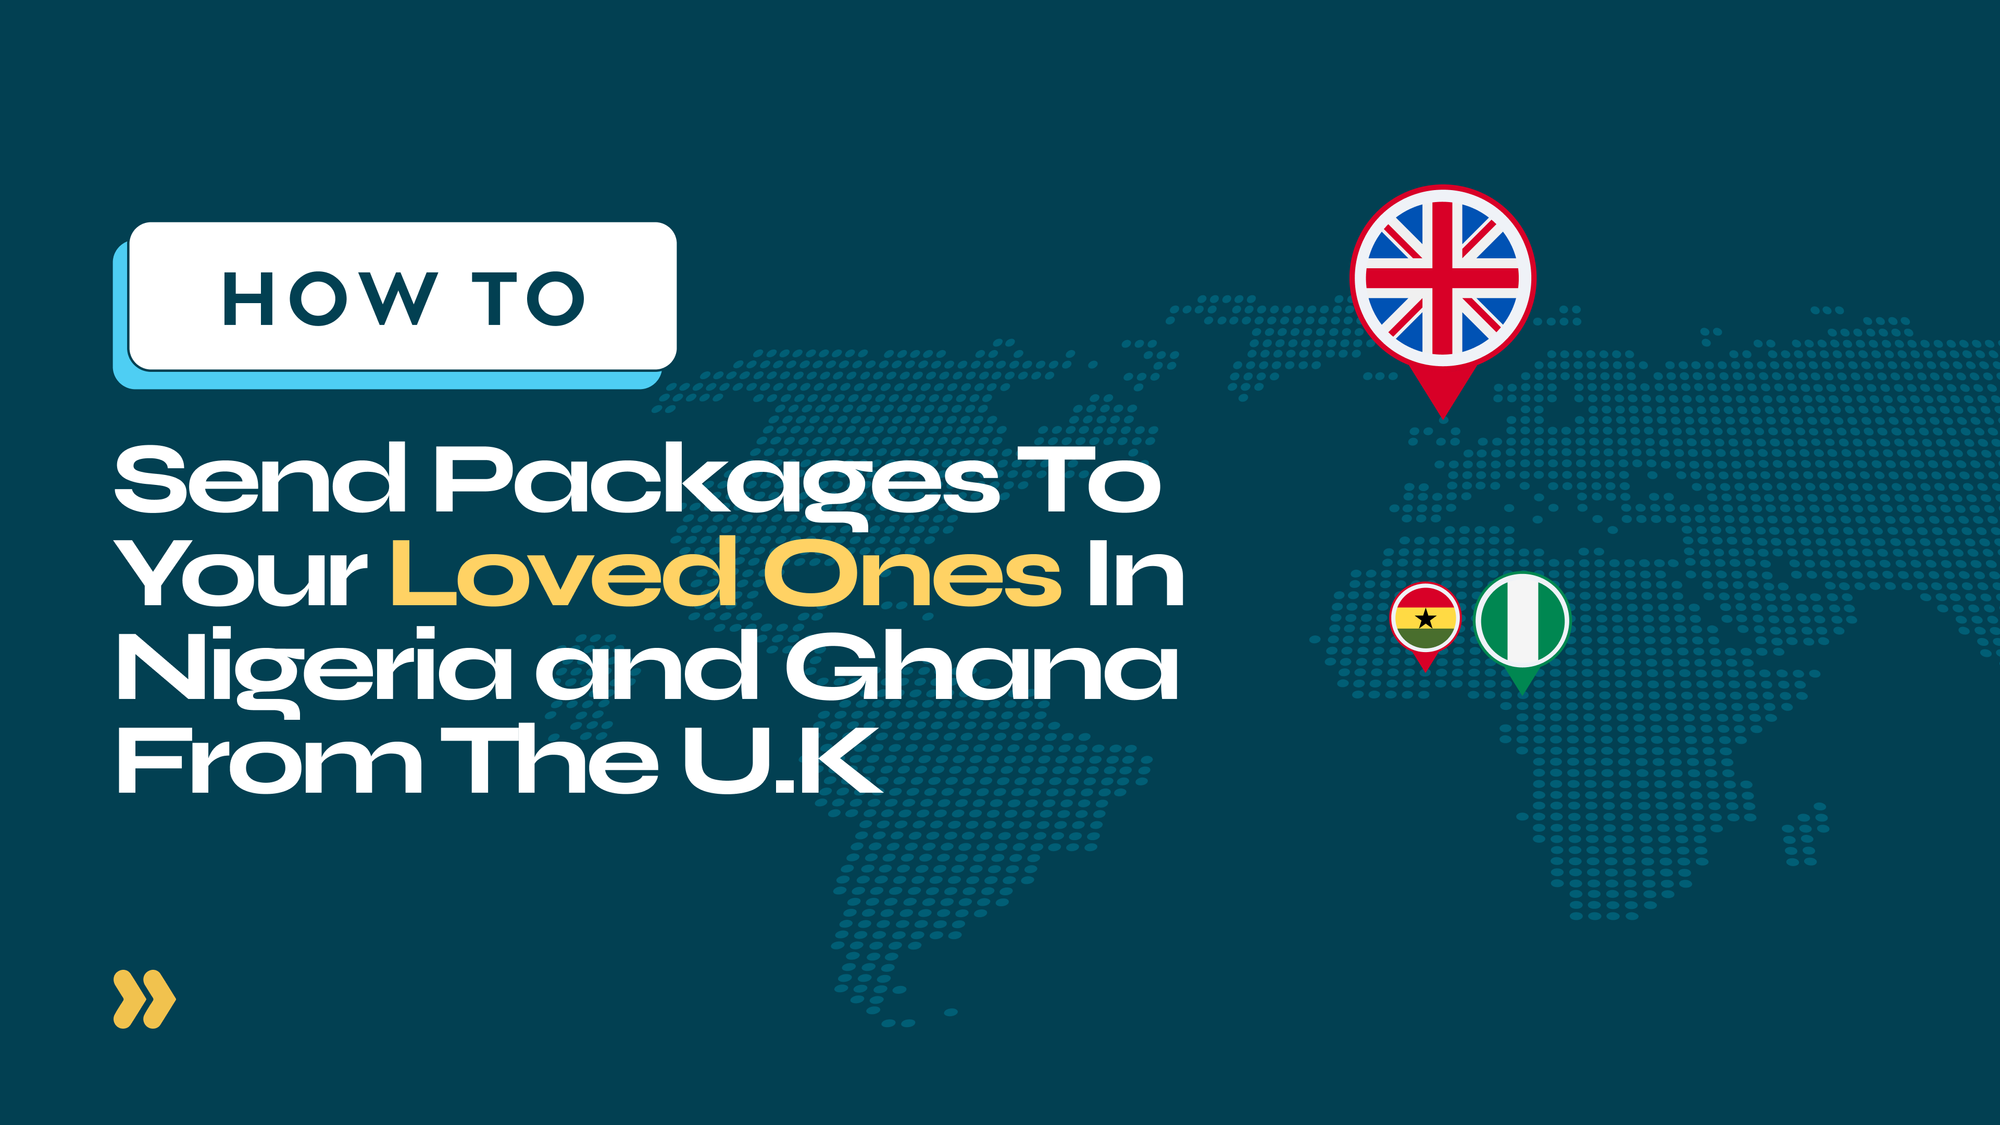 How To Send Packages To Your Loved Ones In Nigeria and Ghana From The U.K.